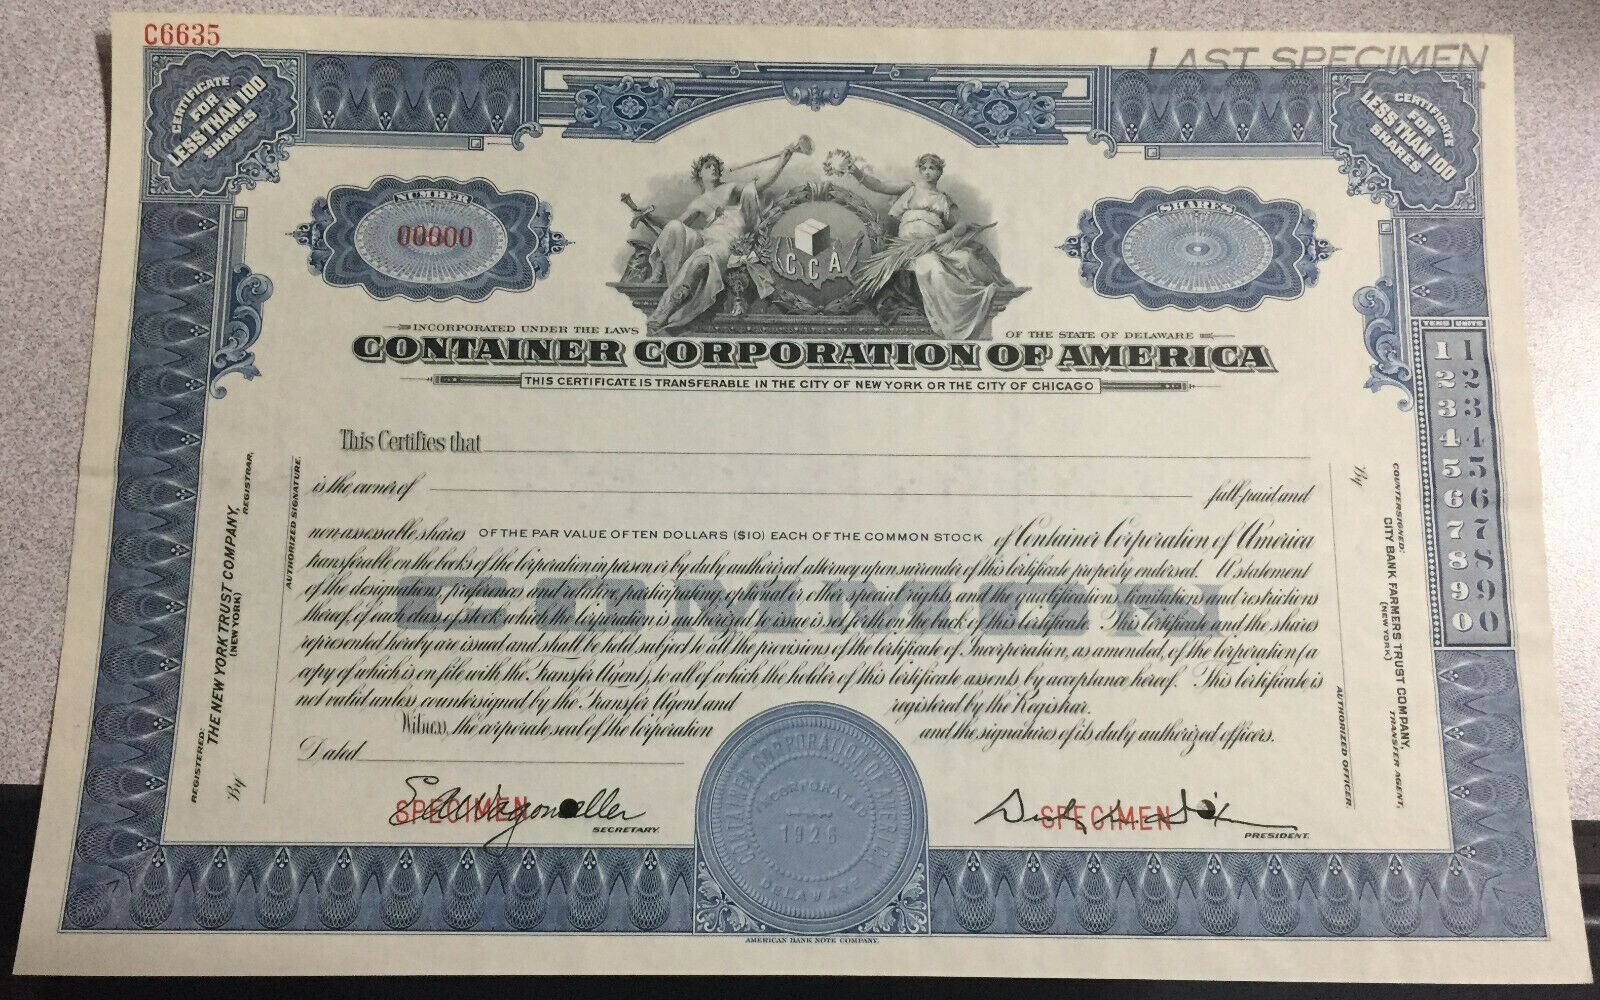 Specimen Certificate. Container Corporation Of America. American Bank Note